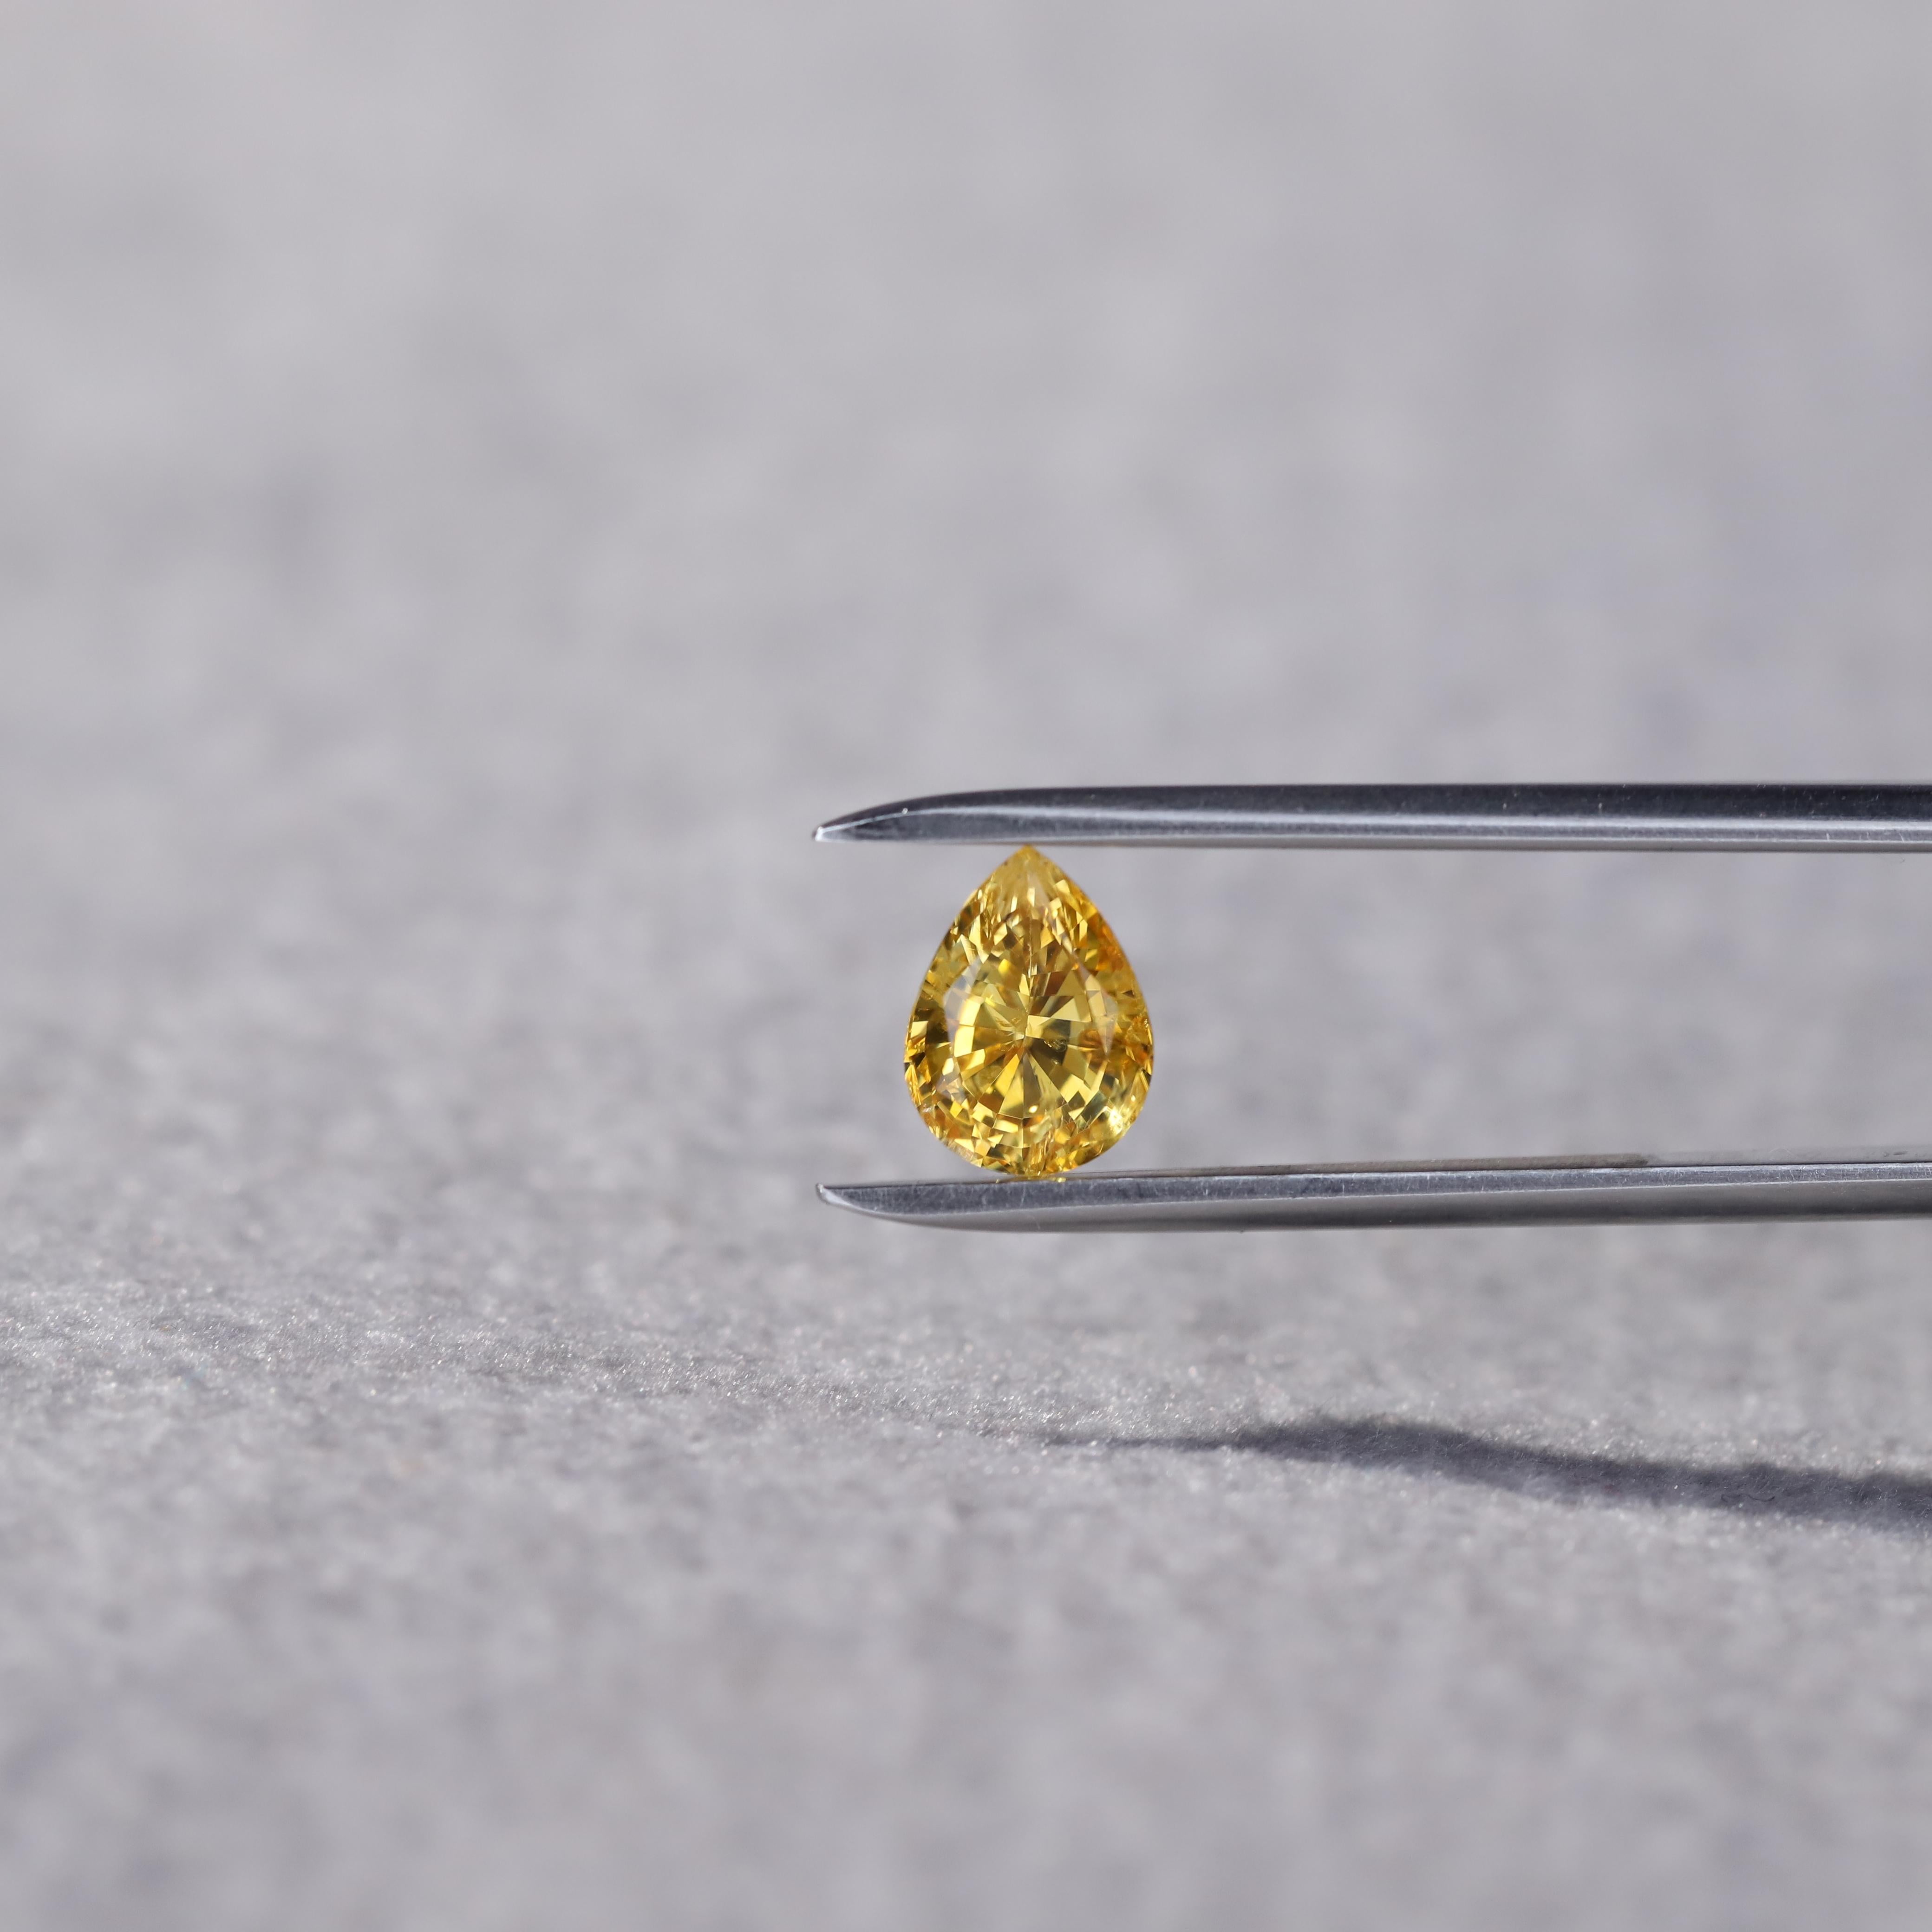 1.87 Carat Pear Cut Natural Golden Yellow Sapphire Loose Gemstone from Sri Lanka For Sale 1